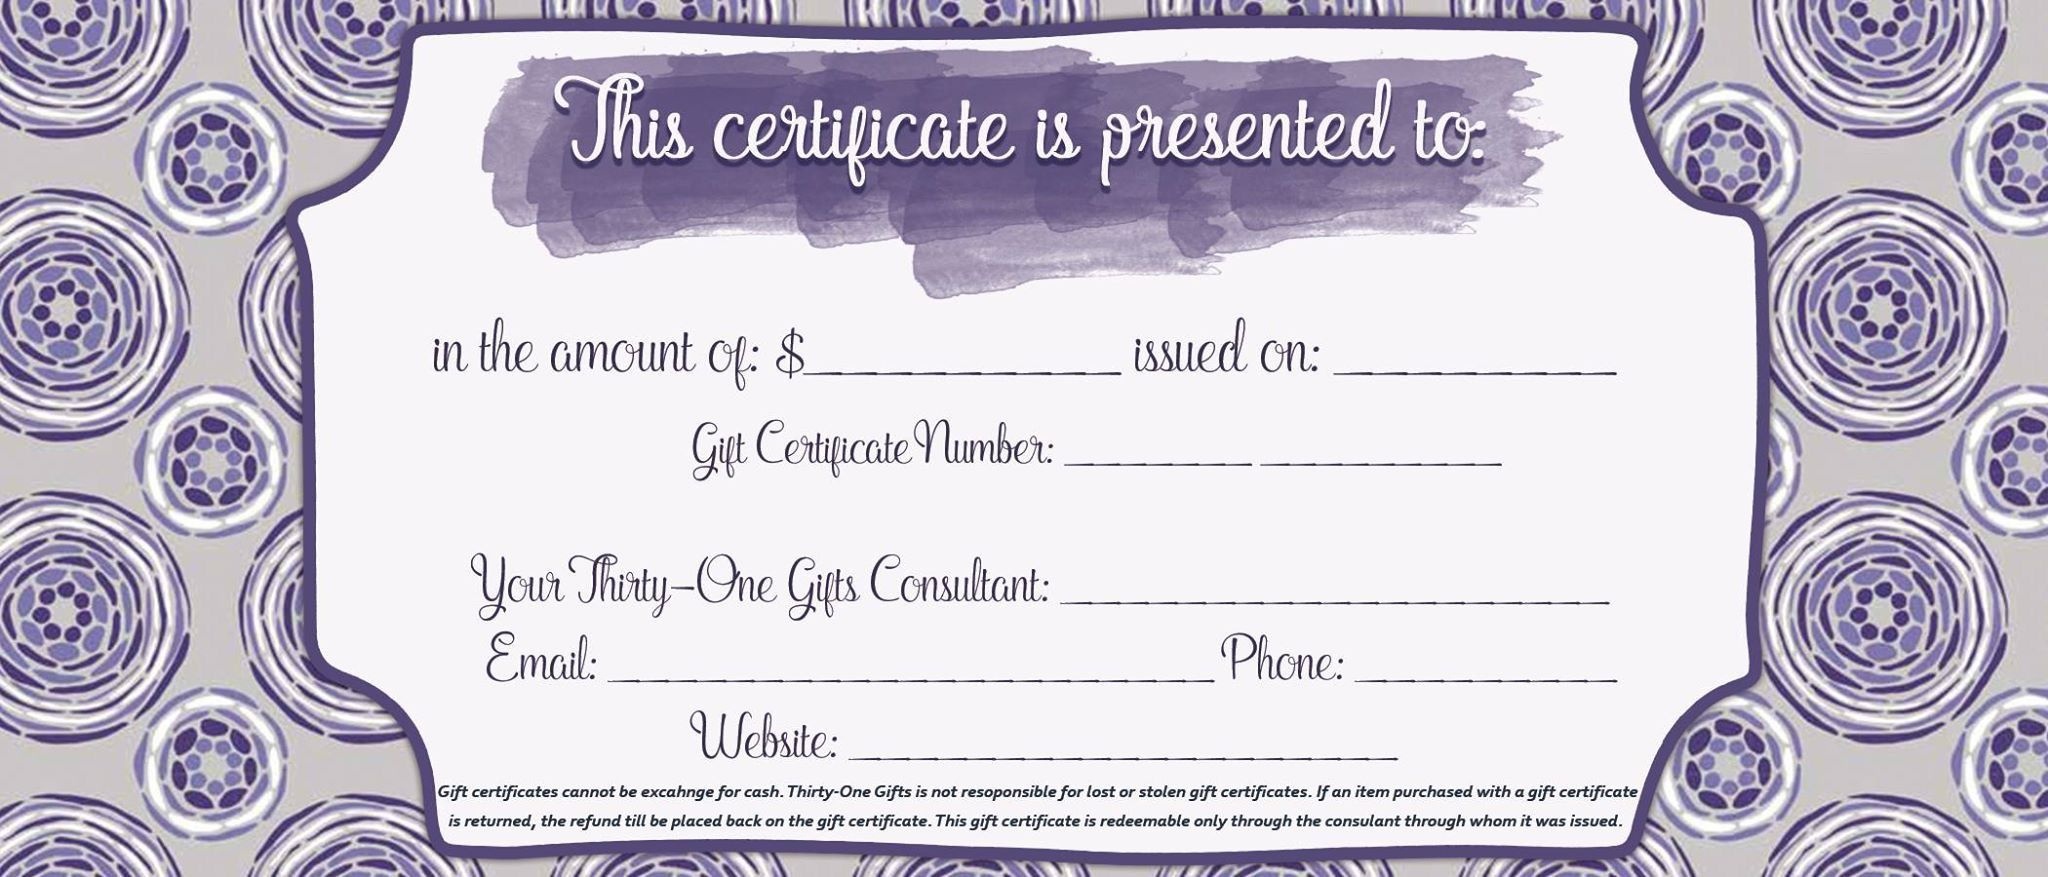 Printable Thirty-One Gift Certificate For Your Thirty-One Biz - Free Printable Gift Certificates